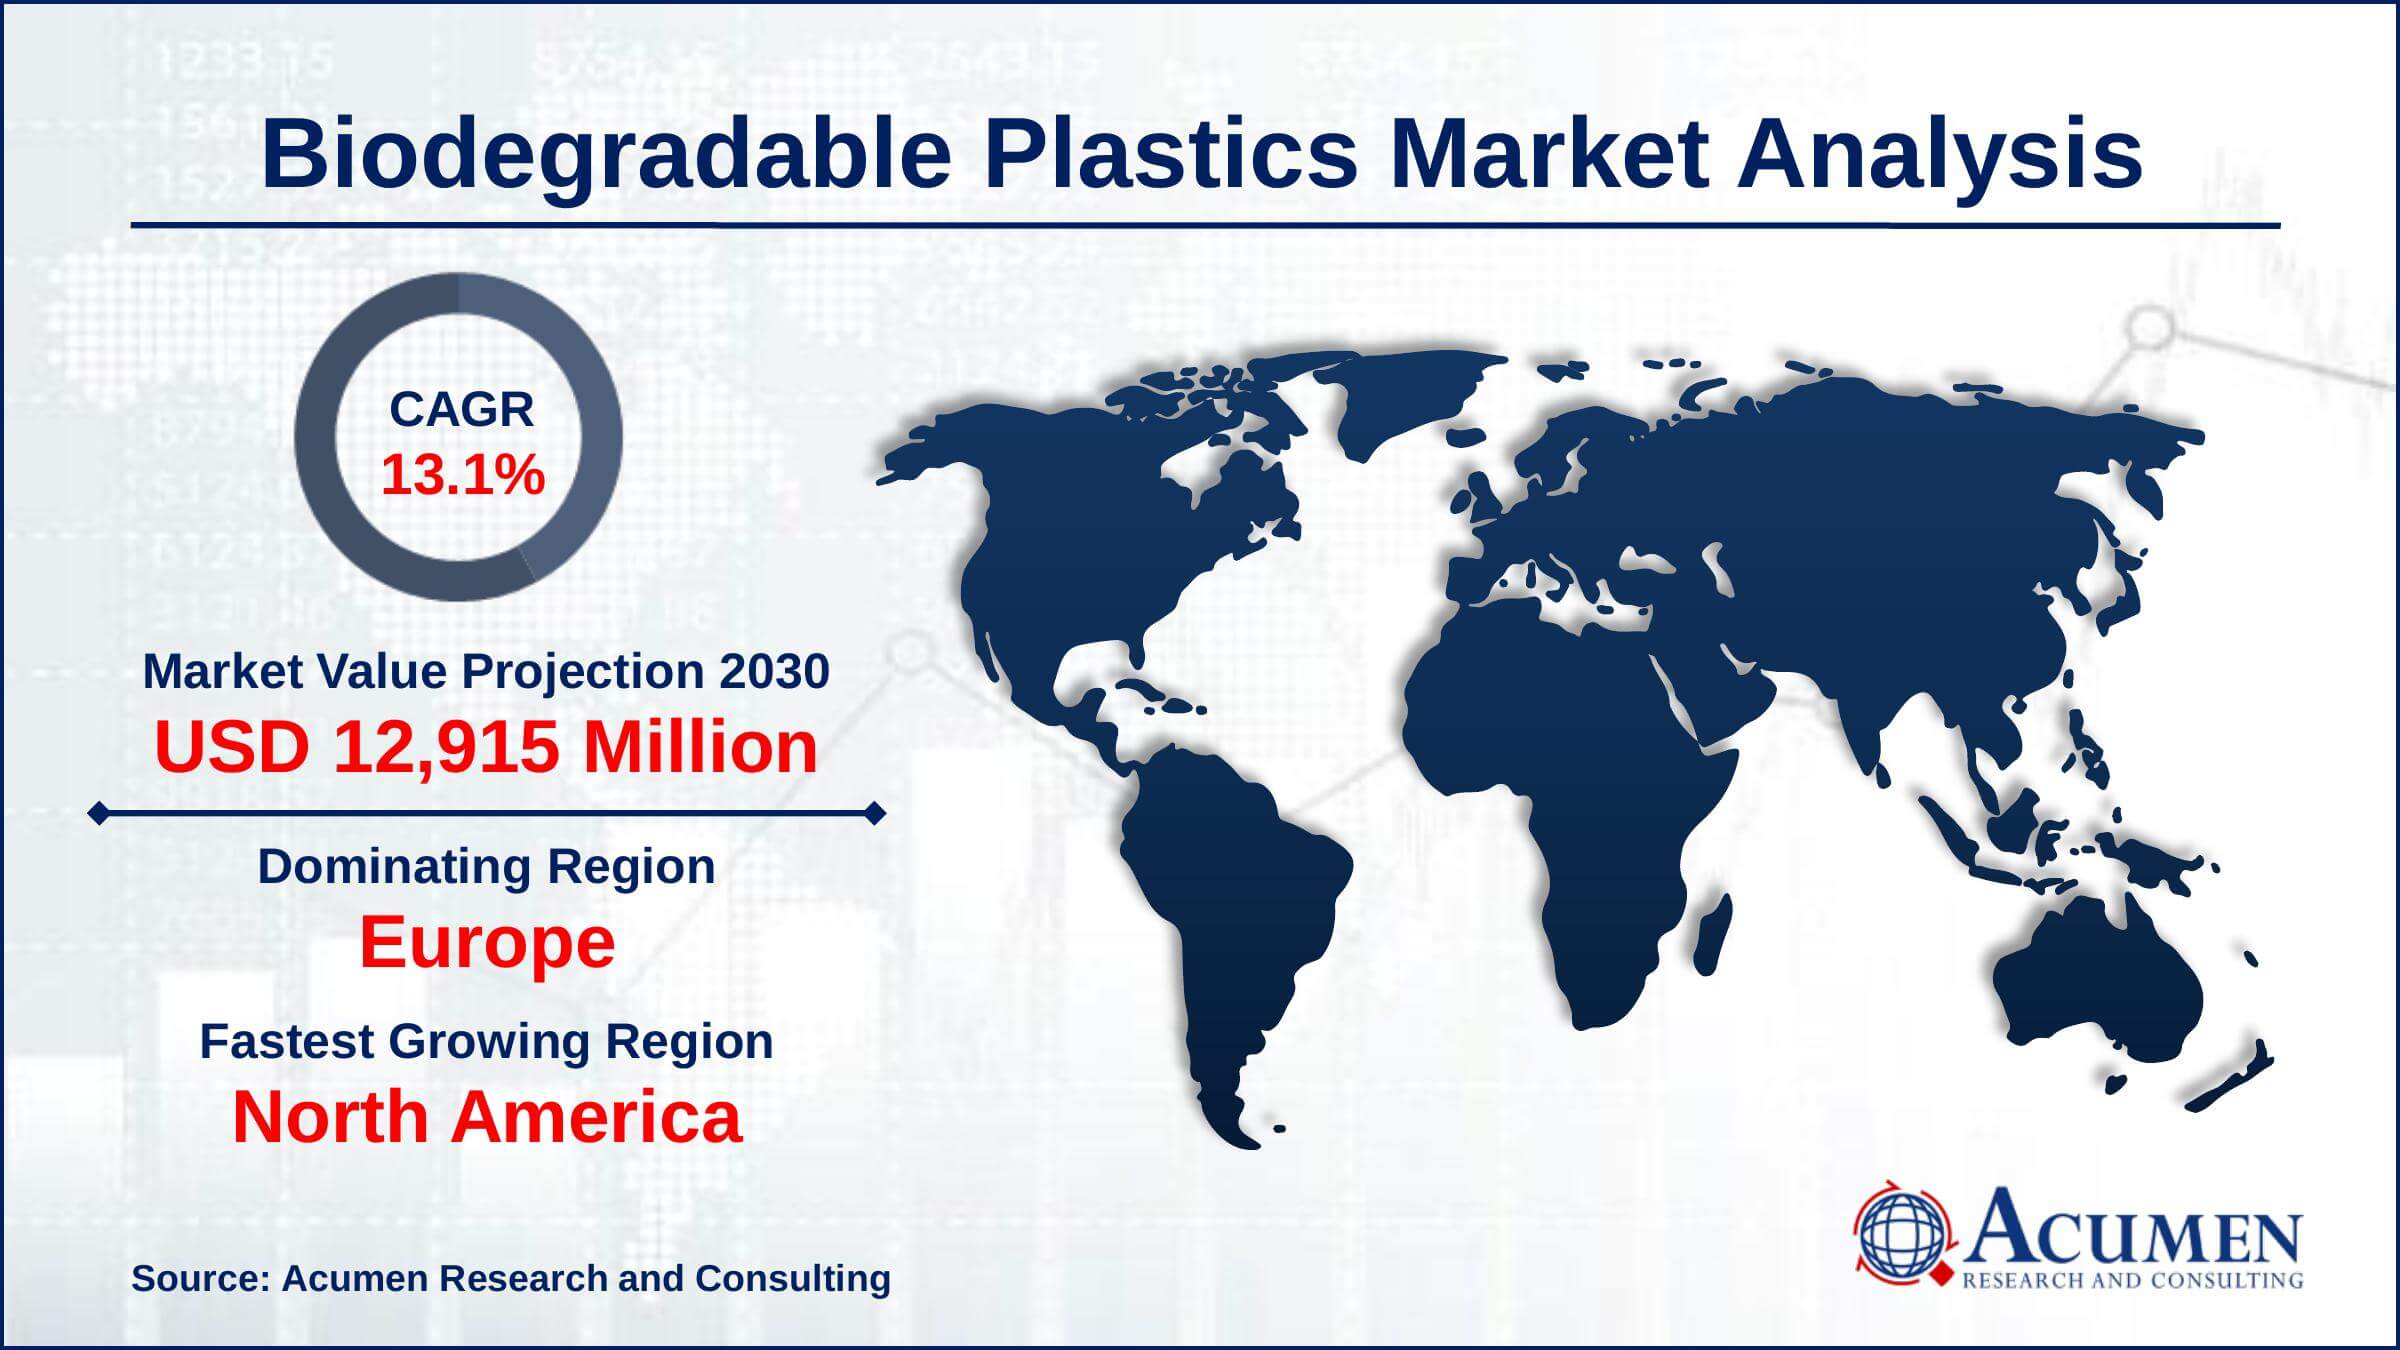 North America biodegradable plastics market growth will observe highest CAGR from 2022 to 2030